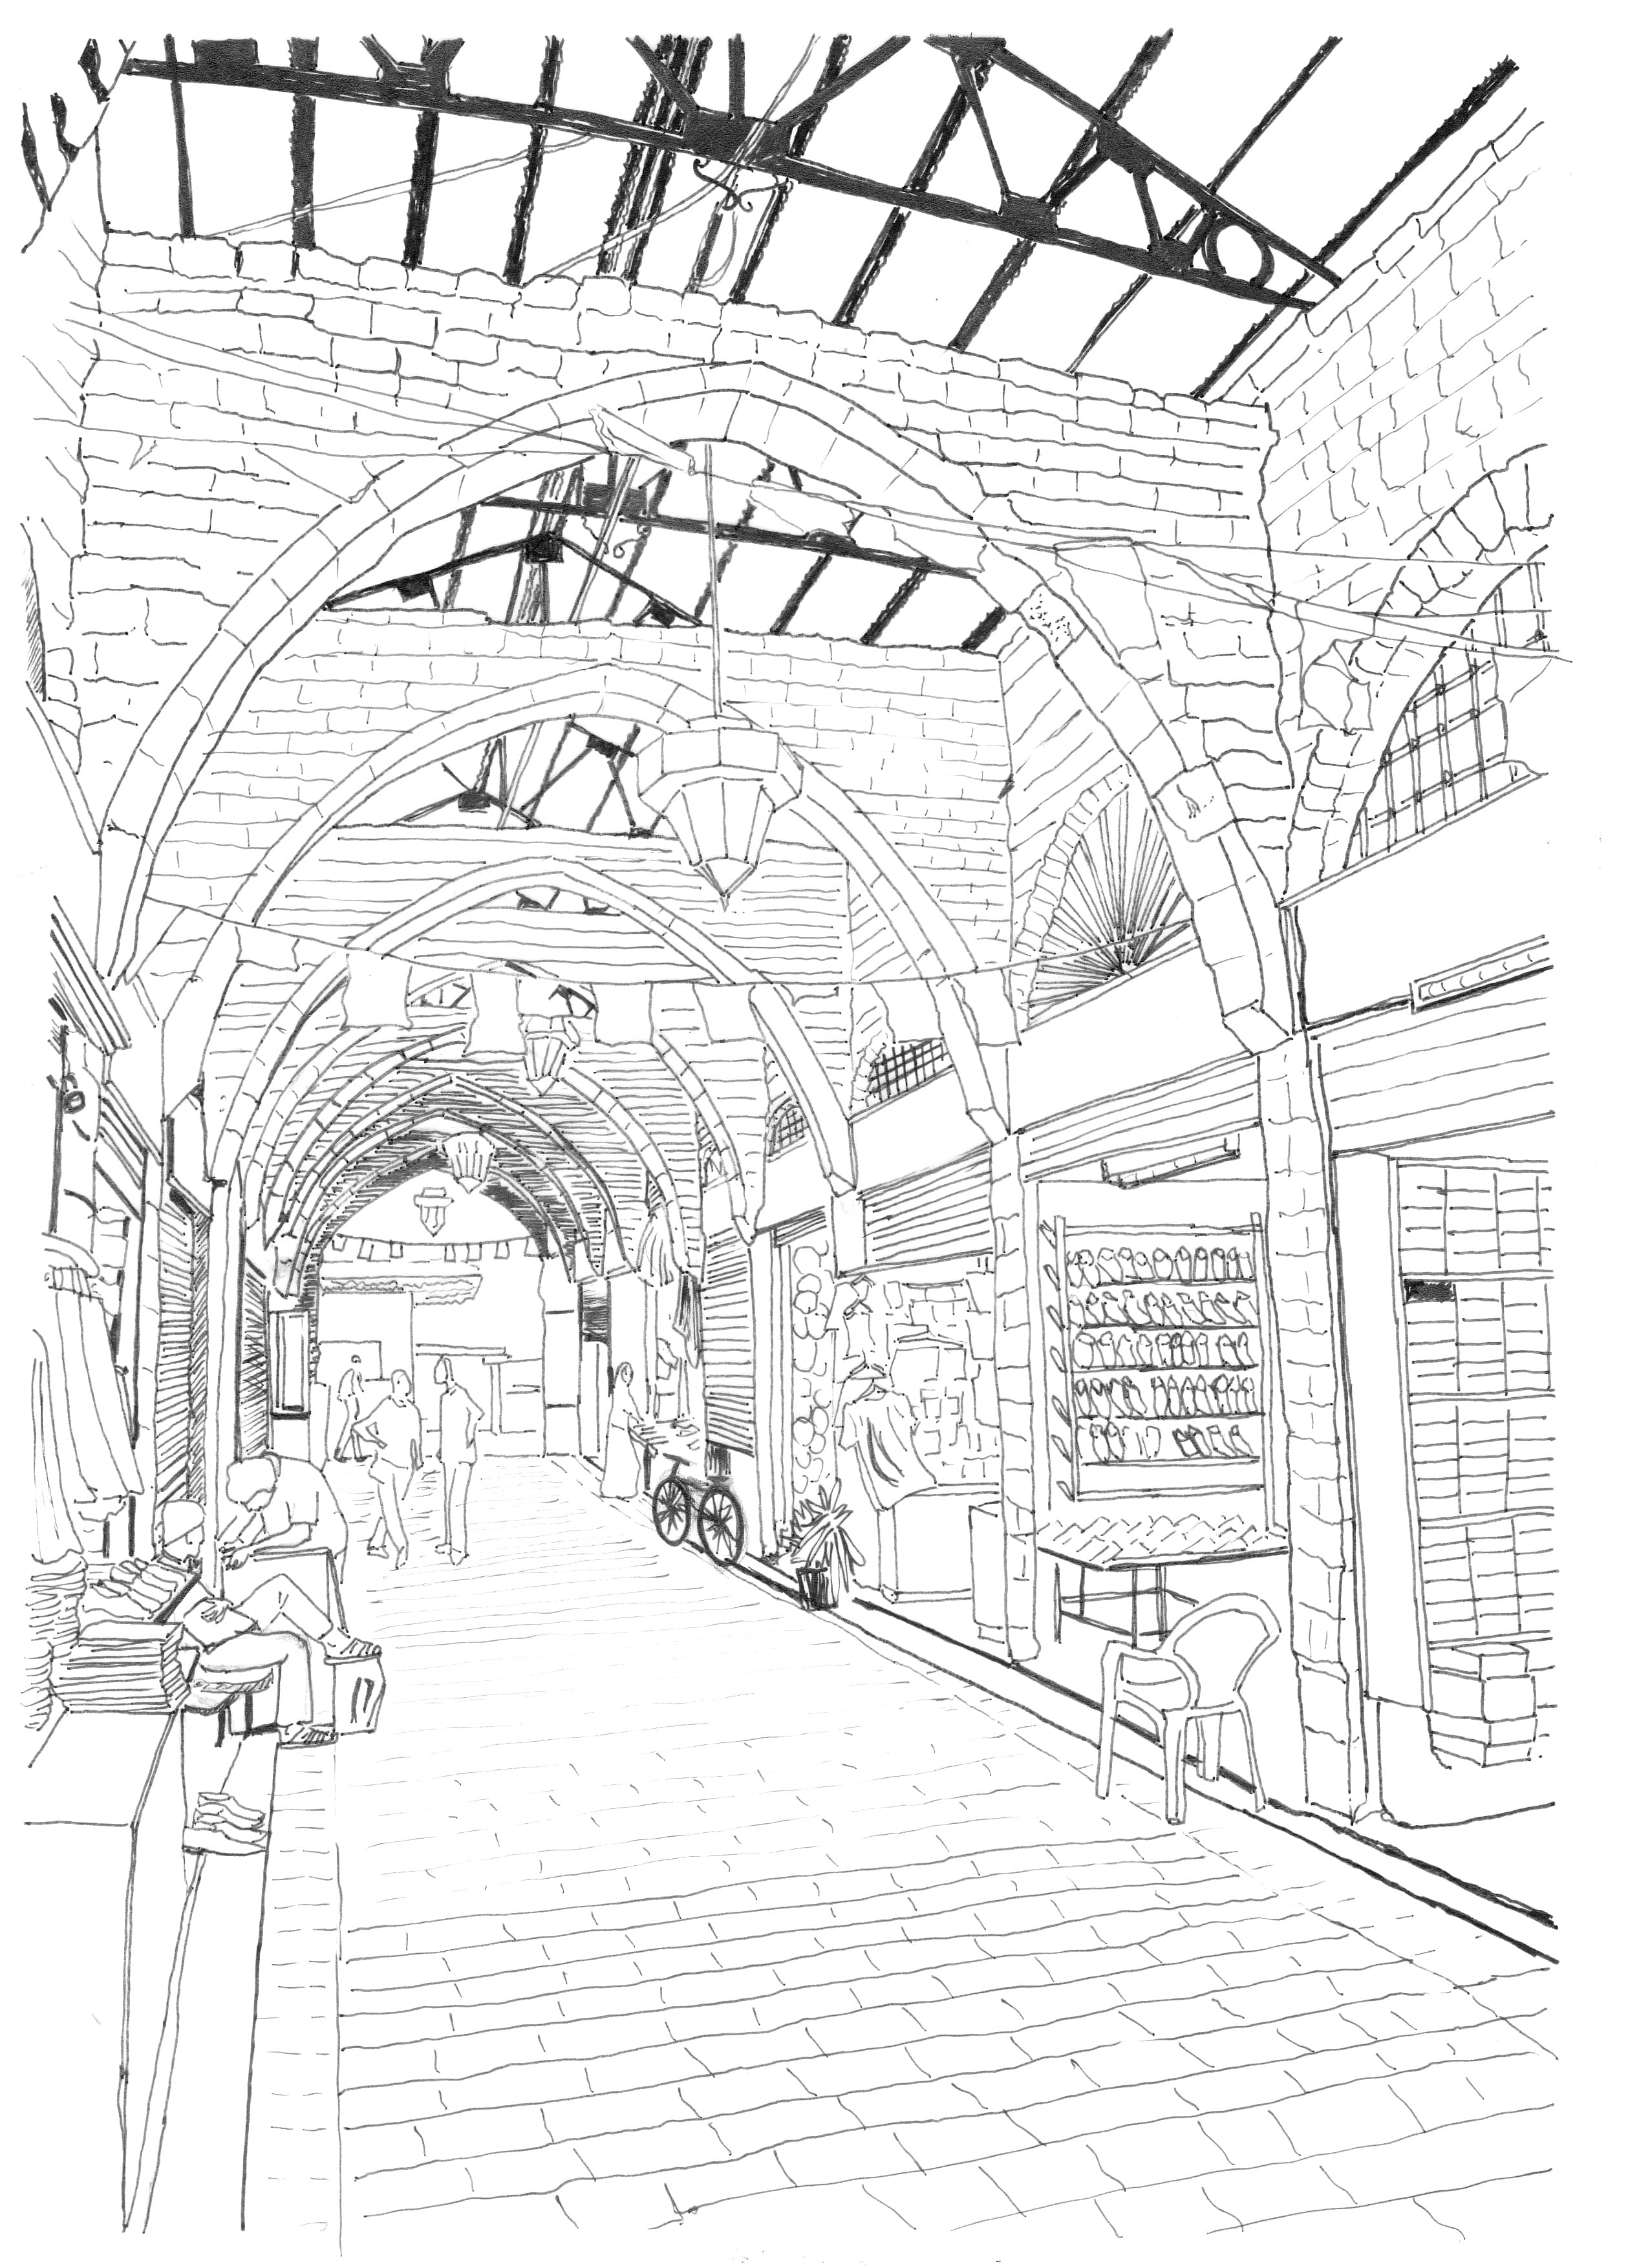 The interior of the arcaded section of the Old Souk in Homs, illustration by Marwa al-Sabouni